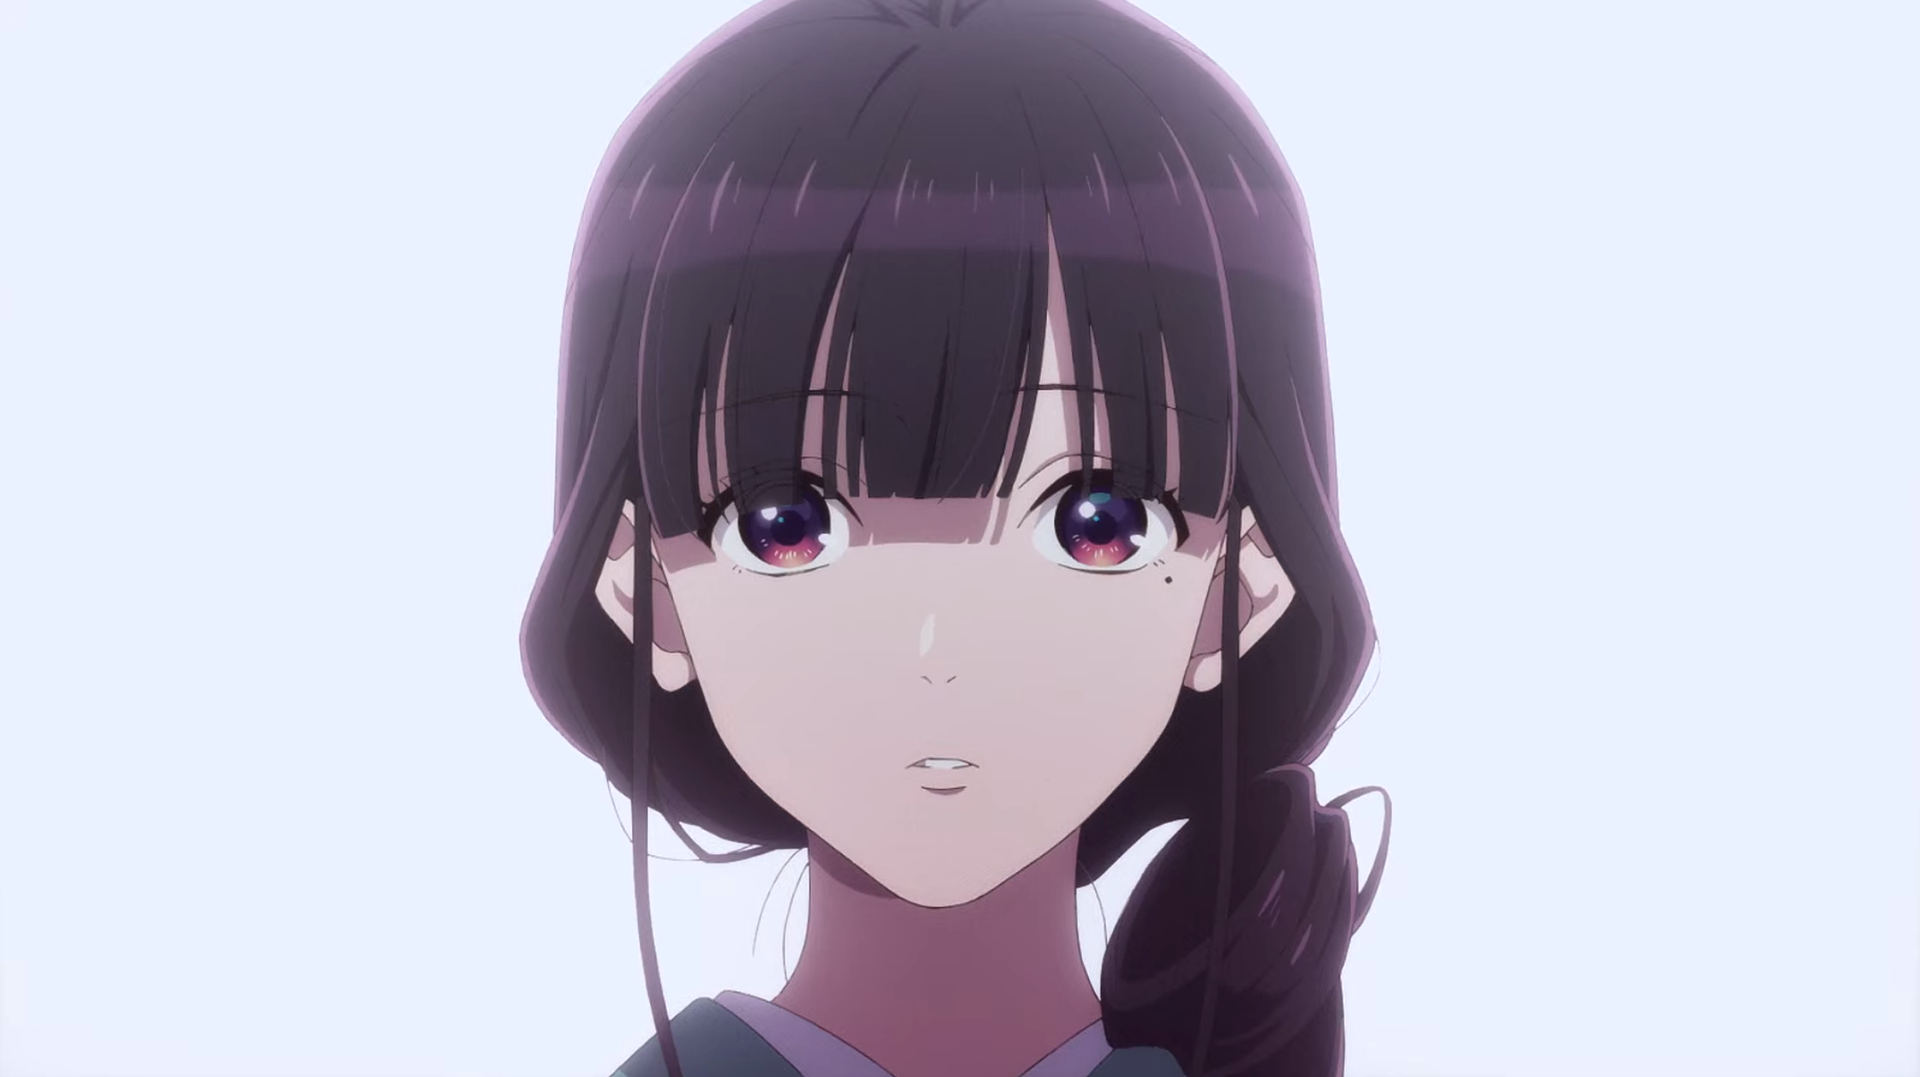 Screenshot from the anime My Happy Marriage, showing the main character looking directly at the camera.